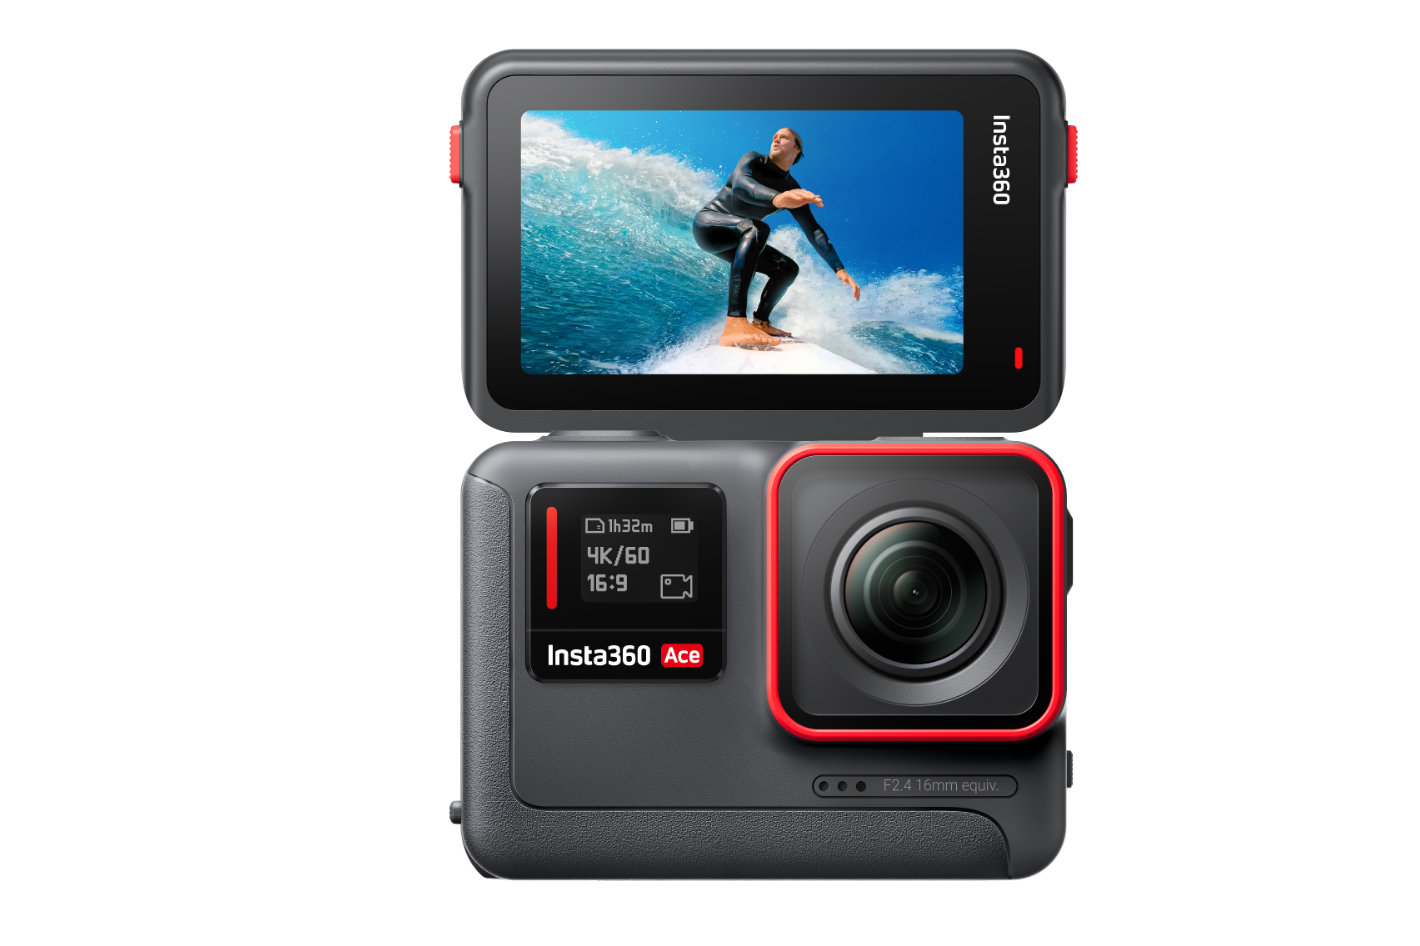 Buy the Insta360 Ace Pro 8K Action Camera Leica f/2.6 Lens - 90